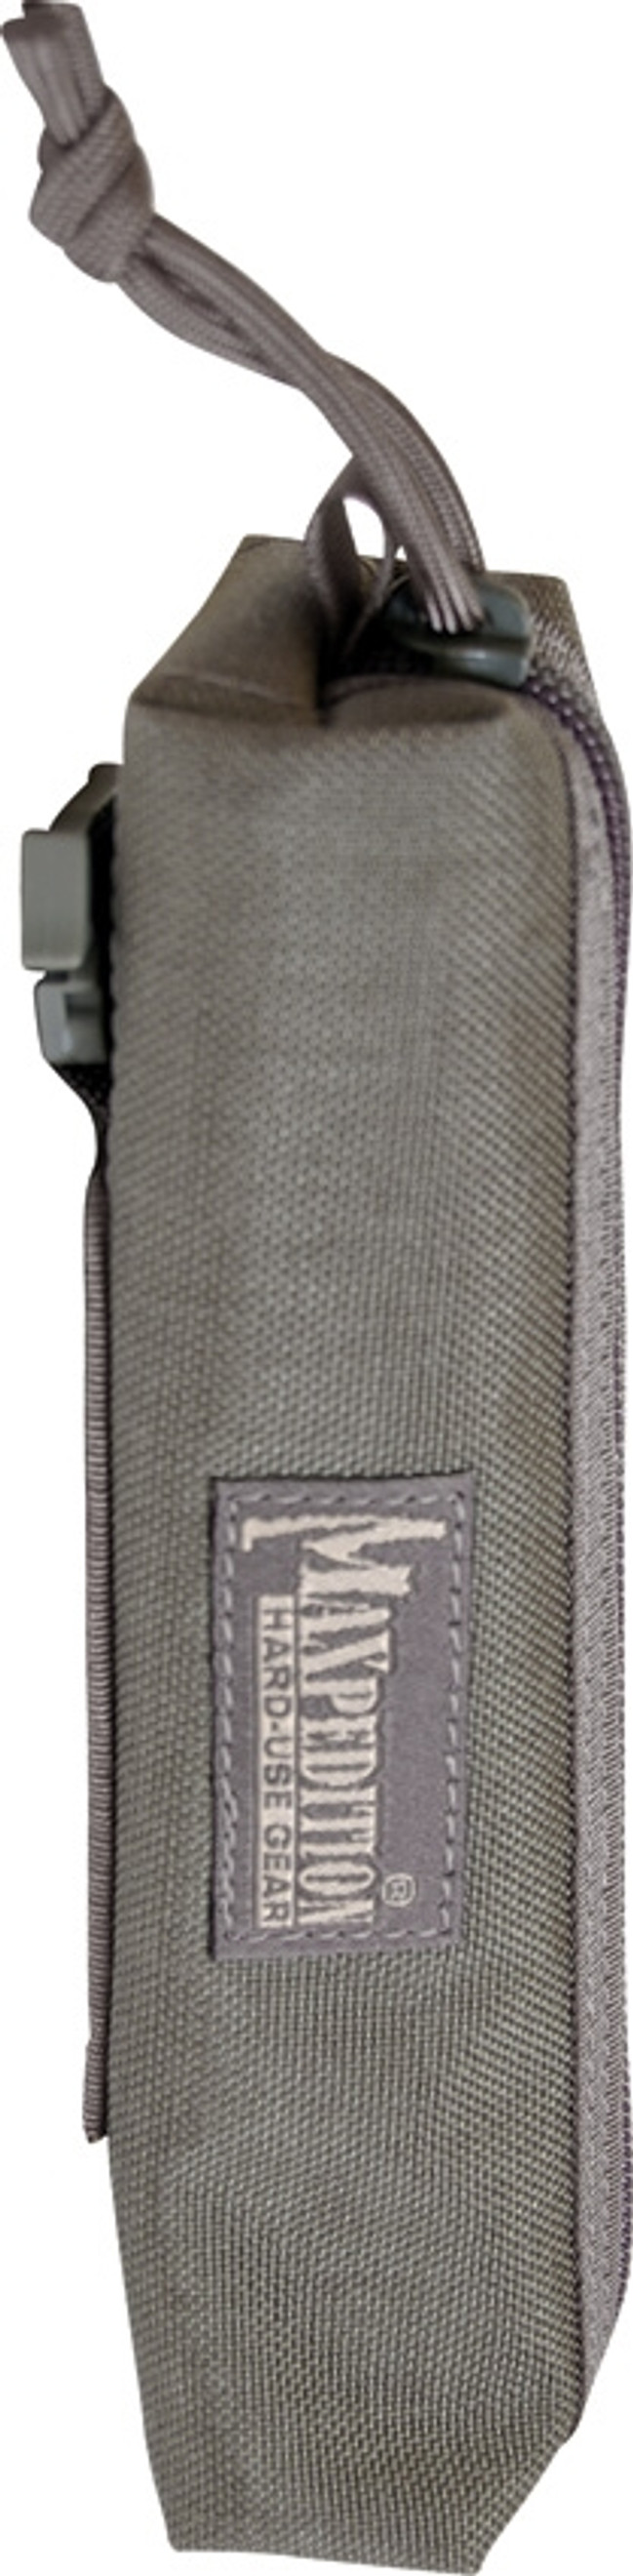 Cocoon Pouch Foliage Green